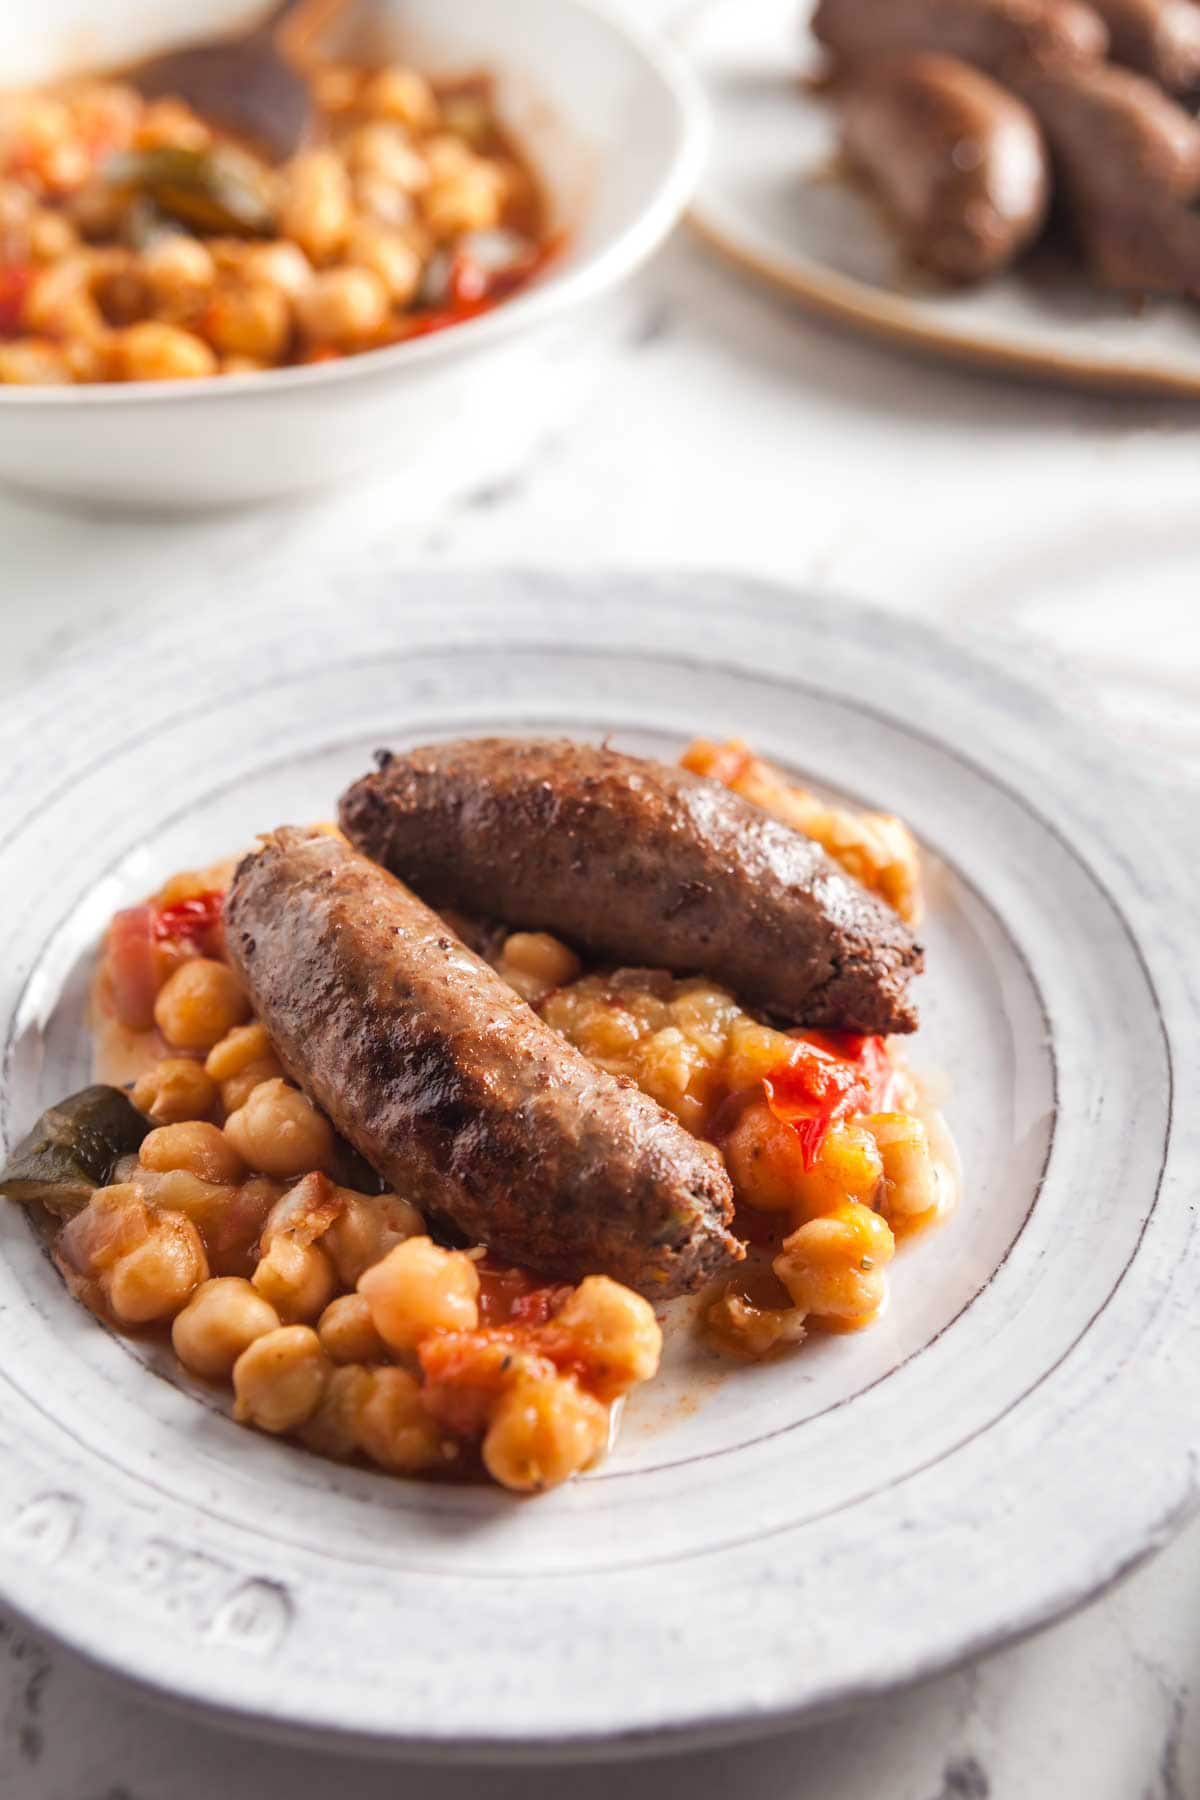 https://www.healthy-delicious.com/wp-content/uploads/2021/11/homemade-beef-sausage-17.jpg